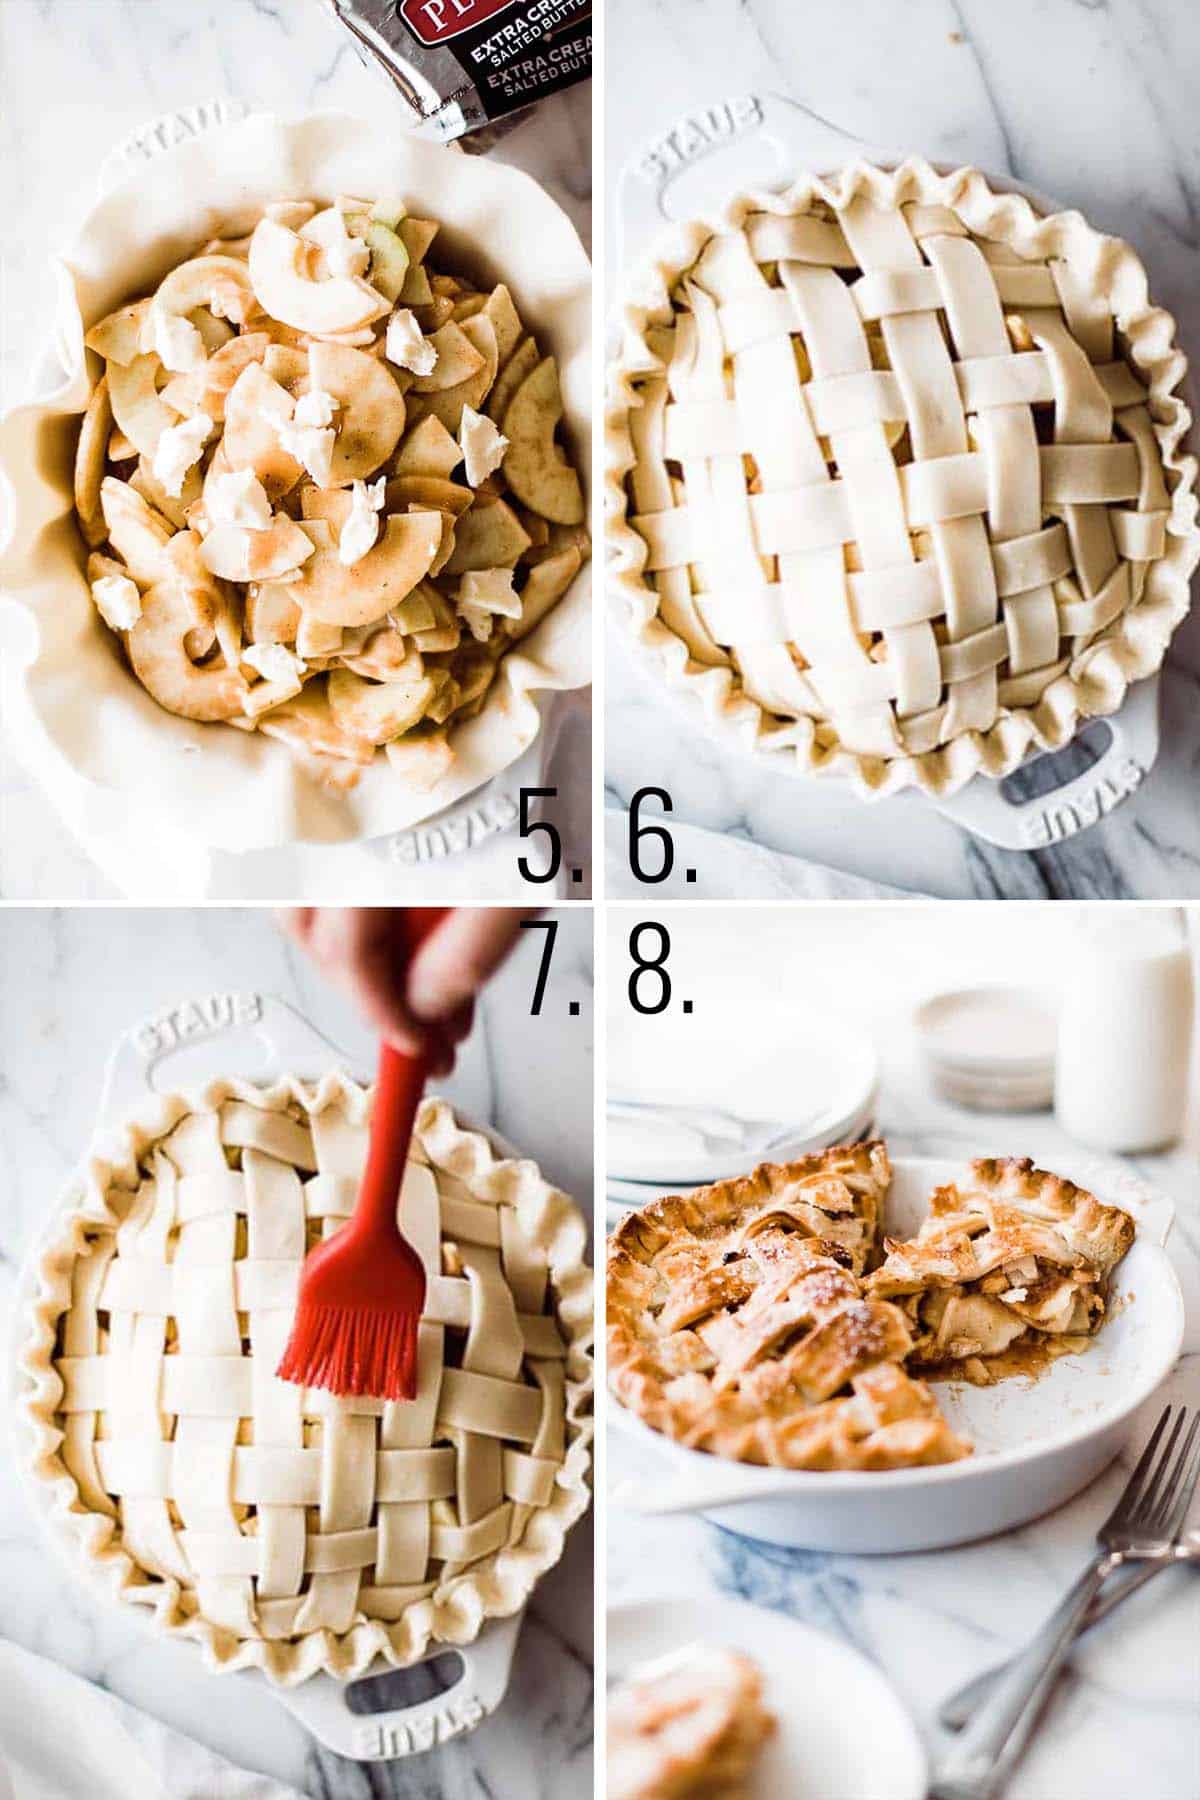 A collage of images showing assembling the apple pie in the pie crust and baking.